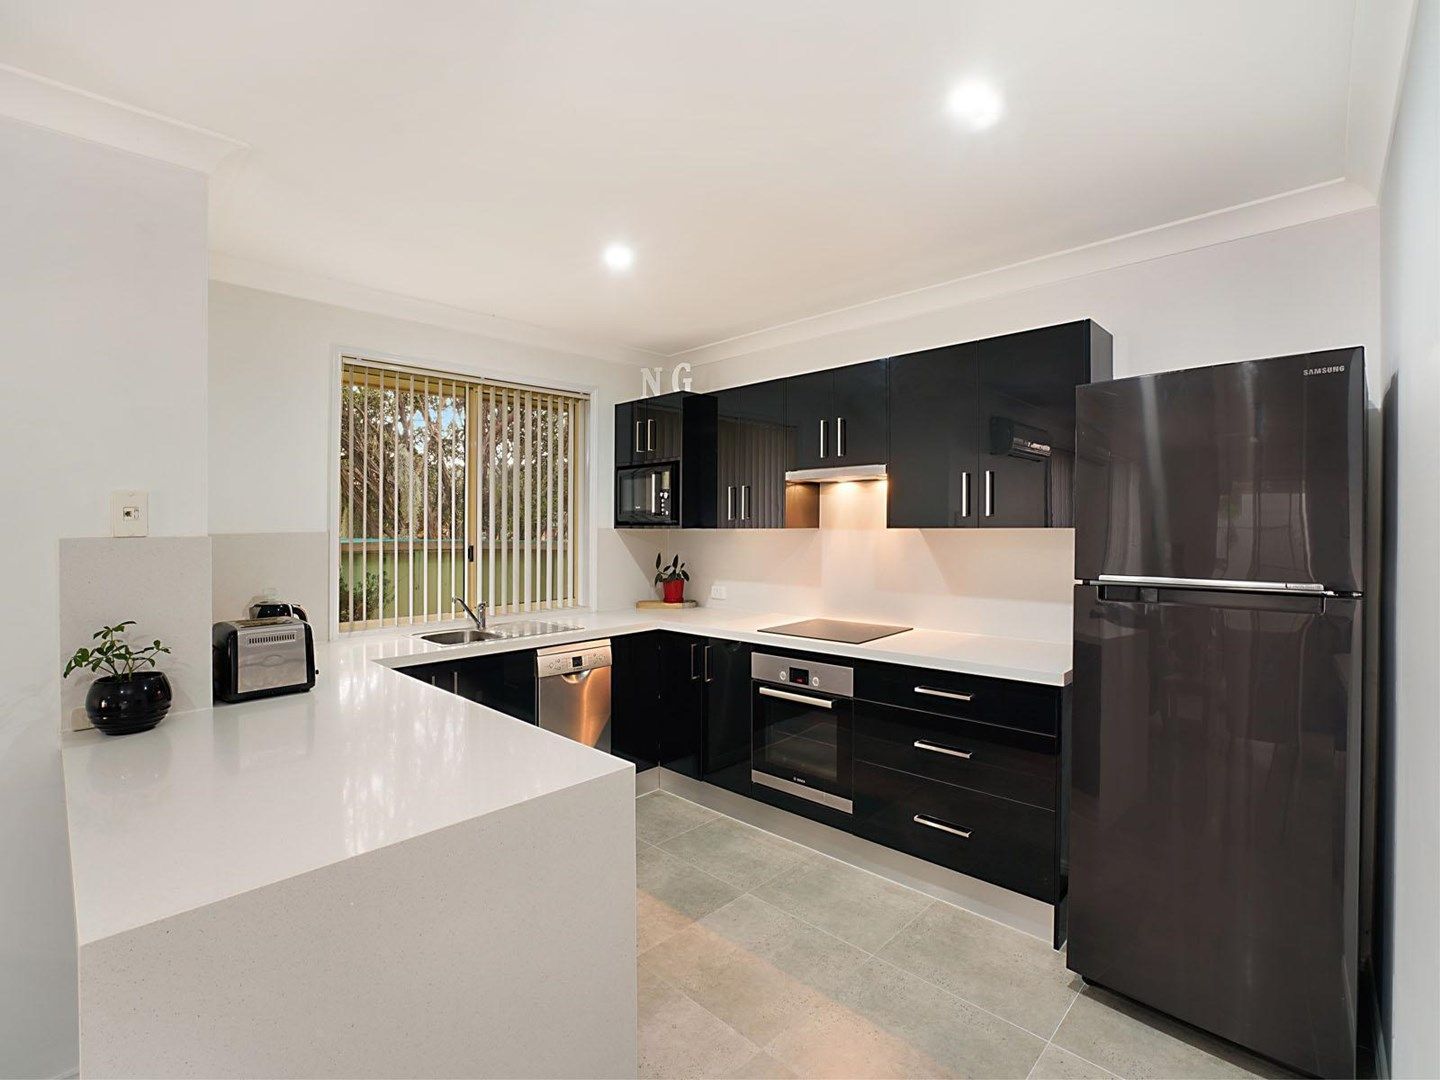 2/28 Country Grove Drive, Cameron Park NSW 2285, Image 0